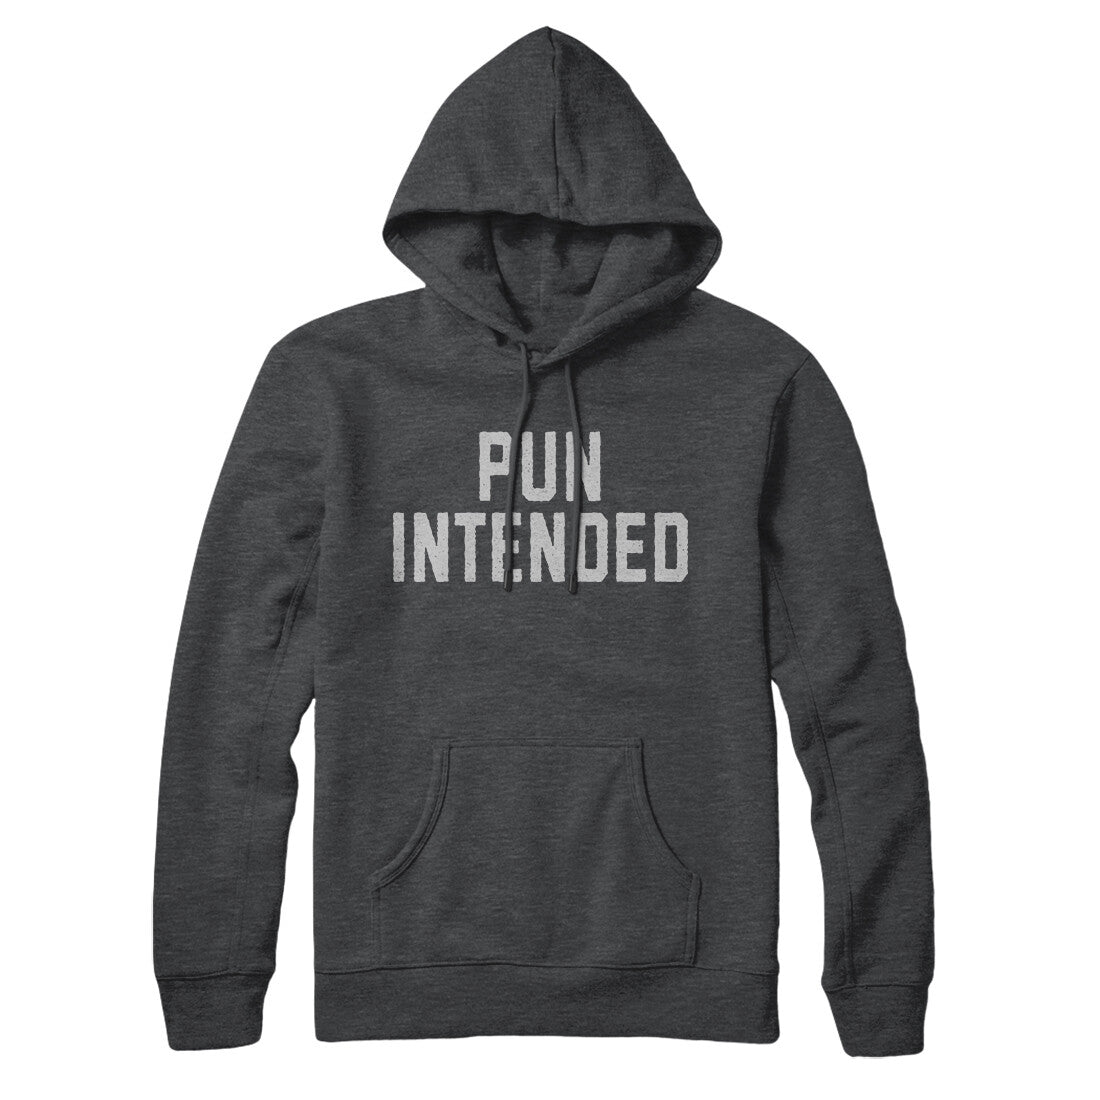 Pun Intended in Charcoal Heather Color